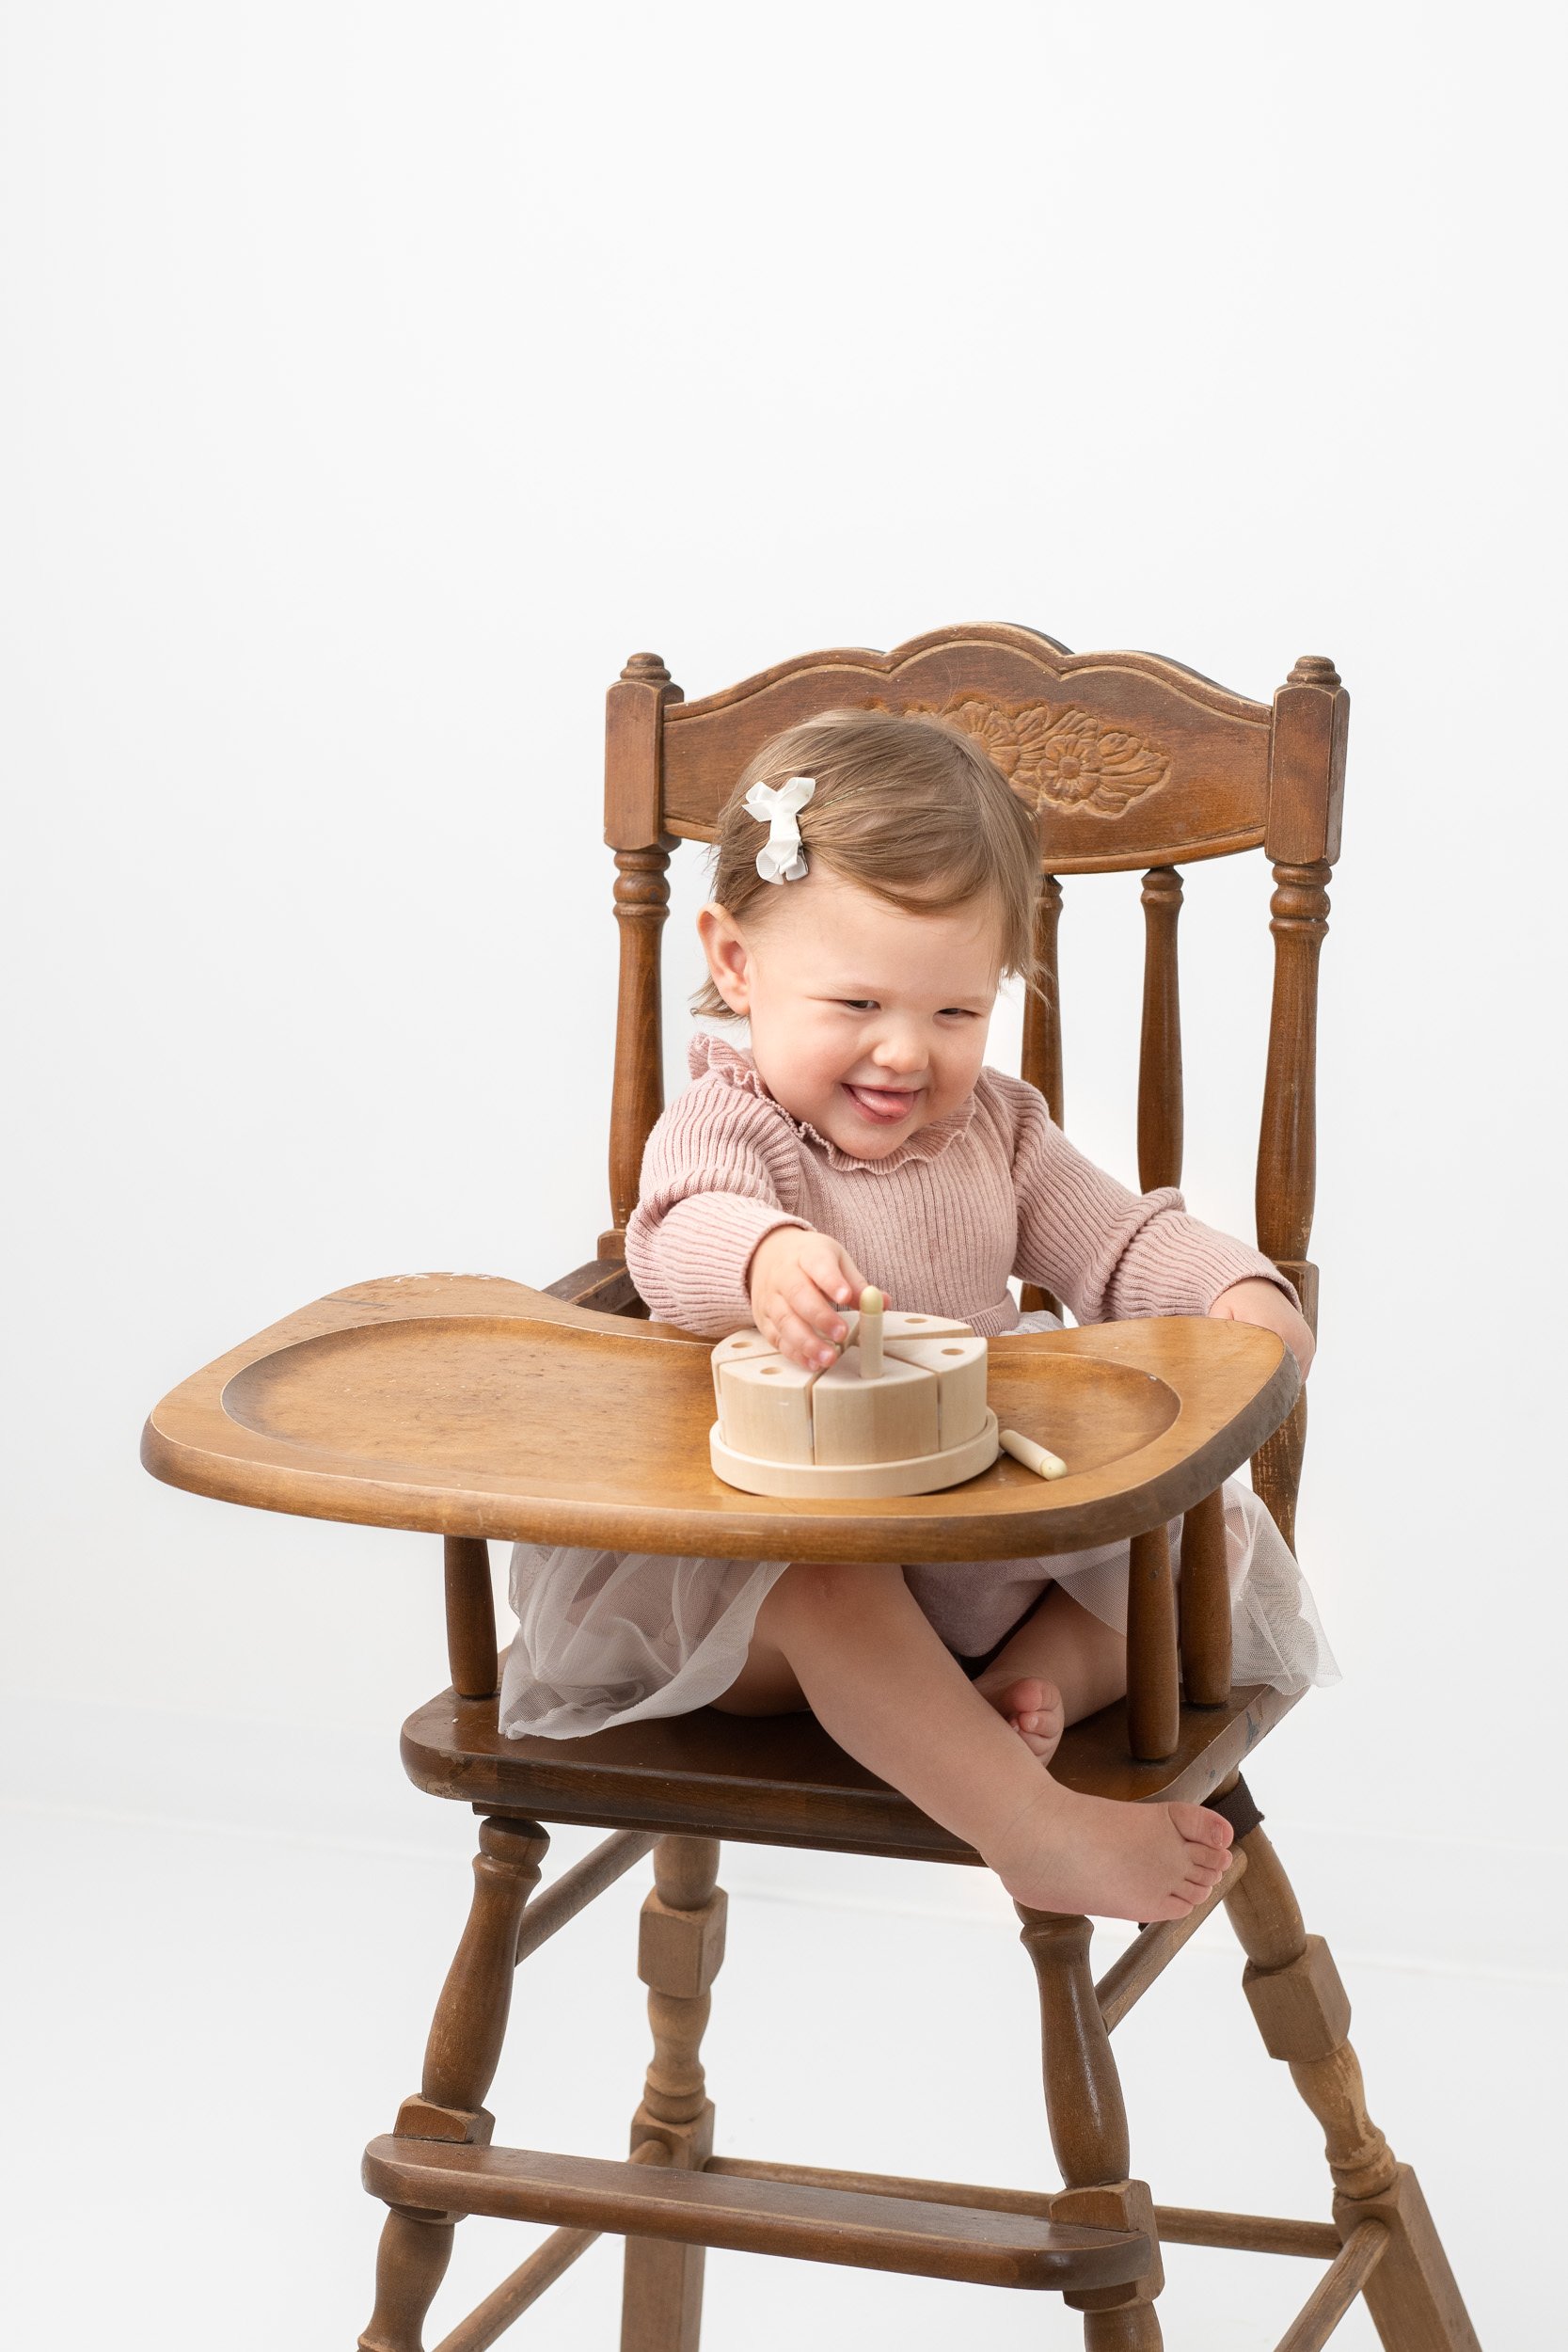  Sitting in an antique high chair a baby girl reaches for her birthday cake by Nicole Hawkins Photography. high chair cake smash #NicoleHawkinsPhotography #NicoleHawkinsBabies #studiochildren #firstbirthday #studiophotography #girlsbirthdayportraits 